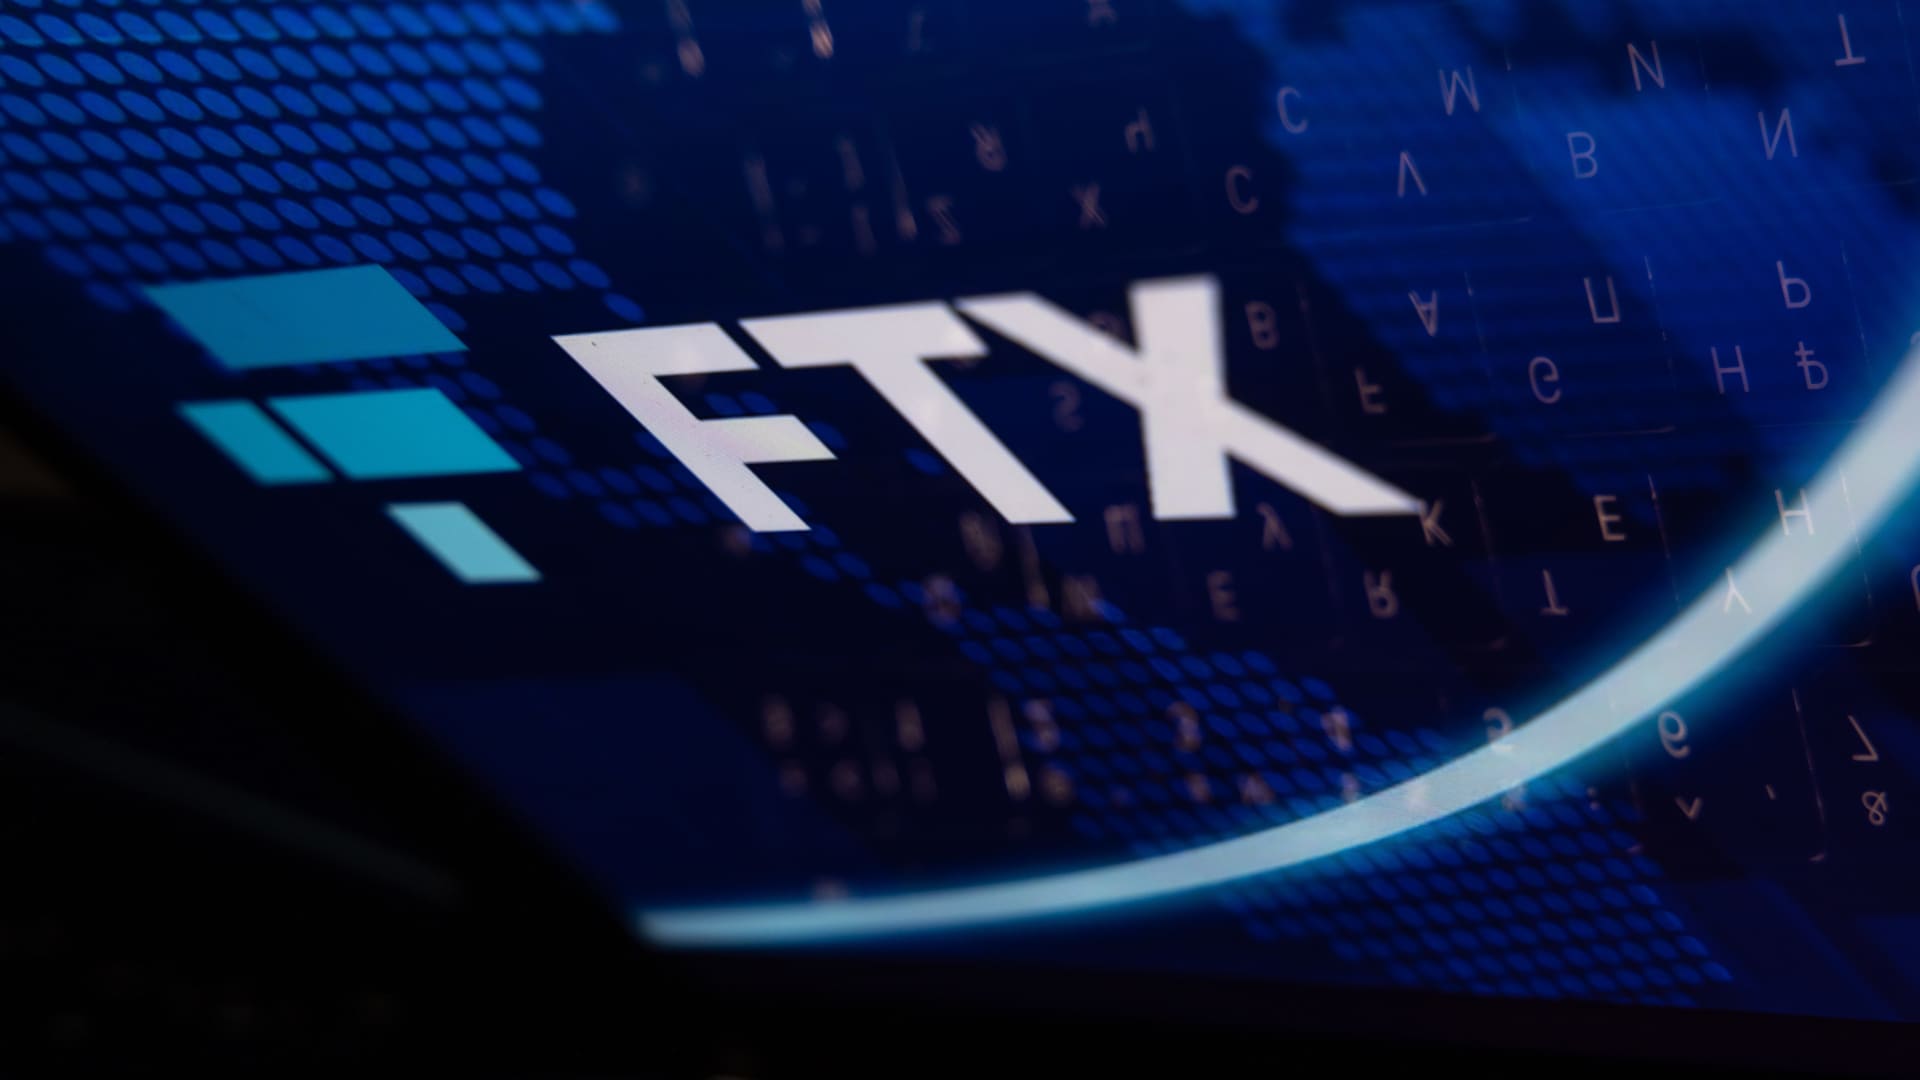 FTX’s Japanese users will be able to start withdrawing funds from February